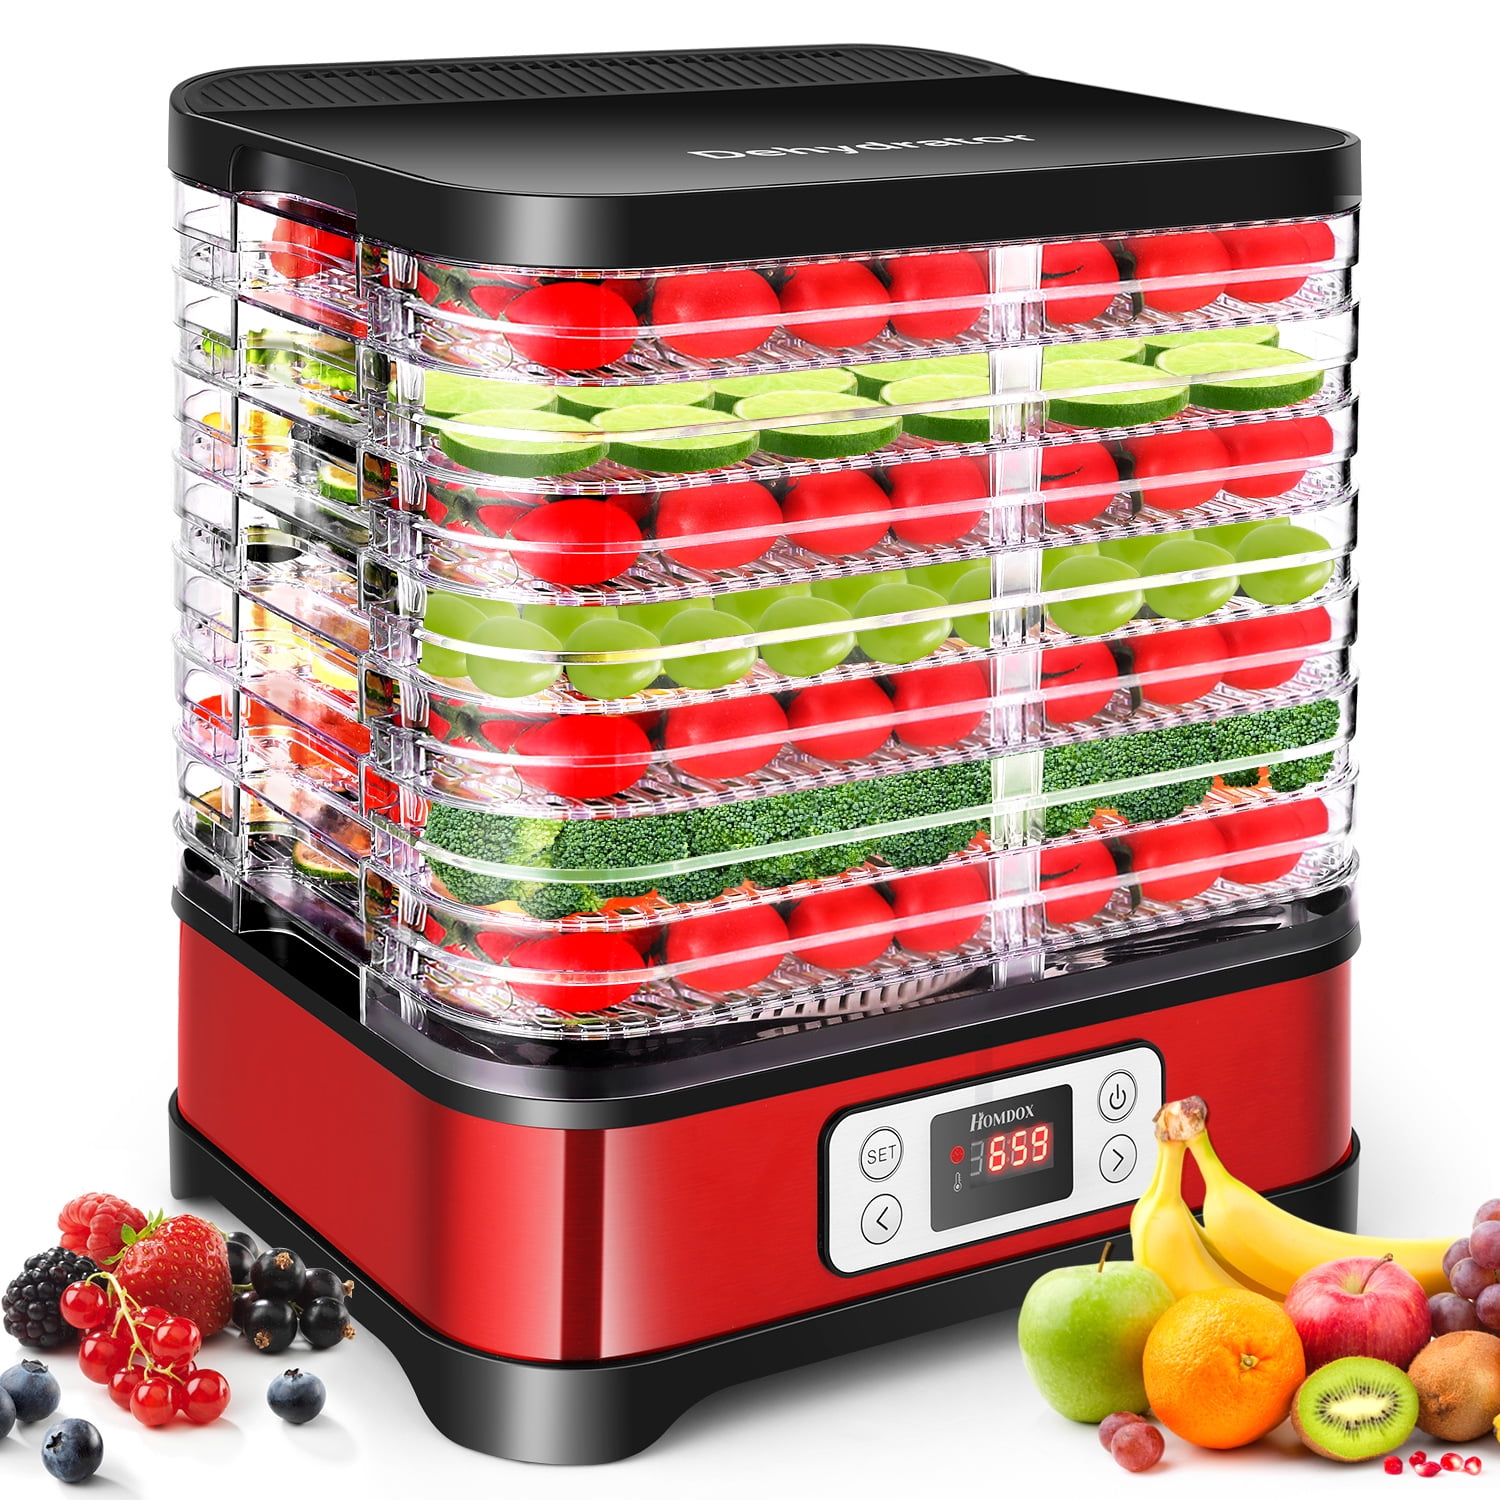 Qhomic Food Dehydrator Machine 8 Trays Professional Electric Multi-Tier  Food Preserver for Jerky Maker/Fruit/Vegetable Dryer(Red） 